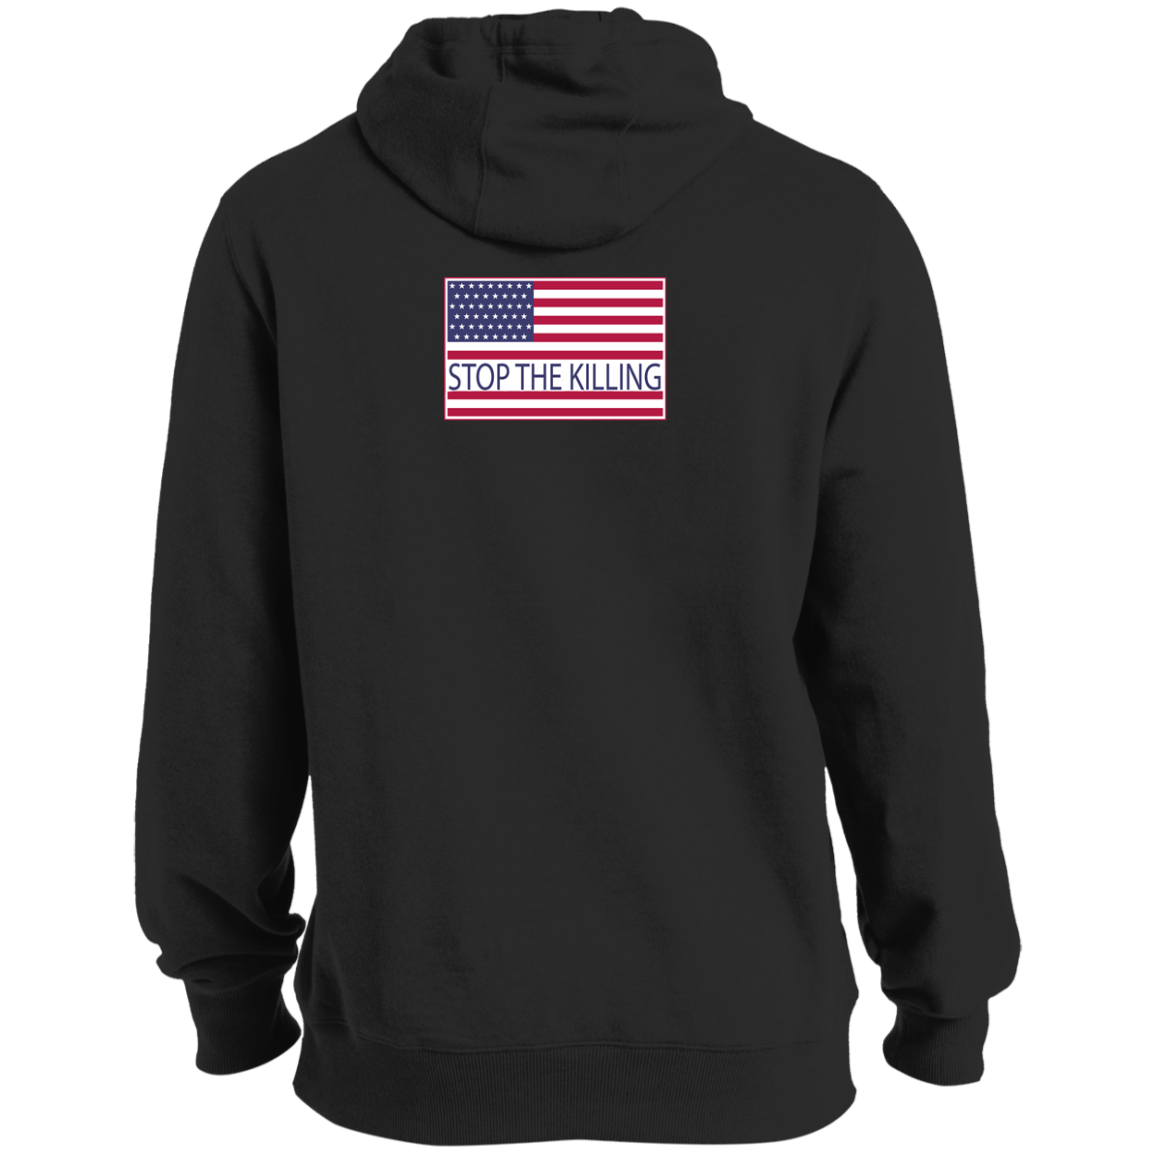 ArtichokeUSA Custom Design. TRIGGERED. STRESSED. Stop the Killing. Ultra Soft Pullover Hoodie